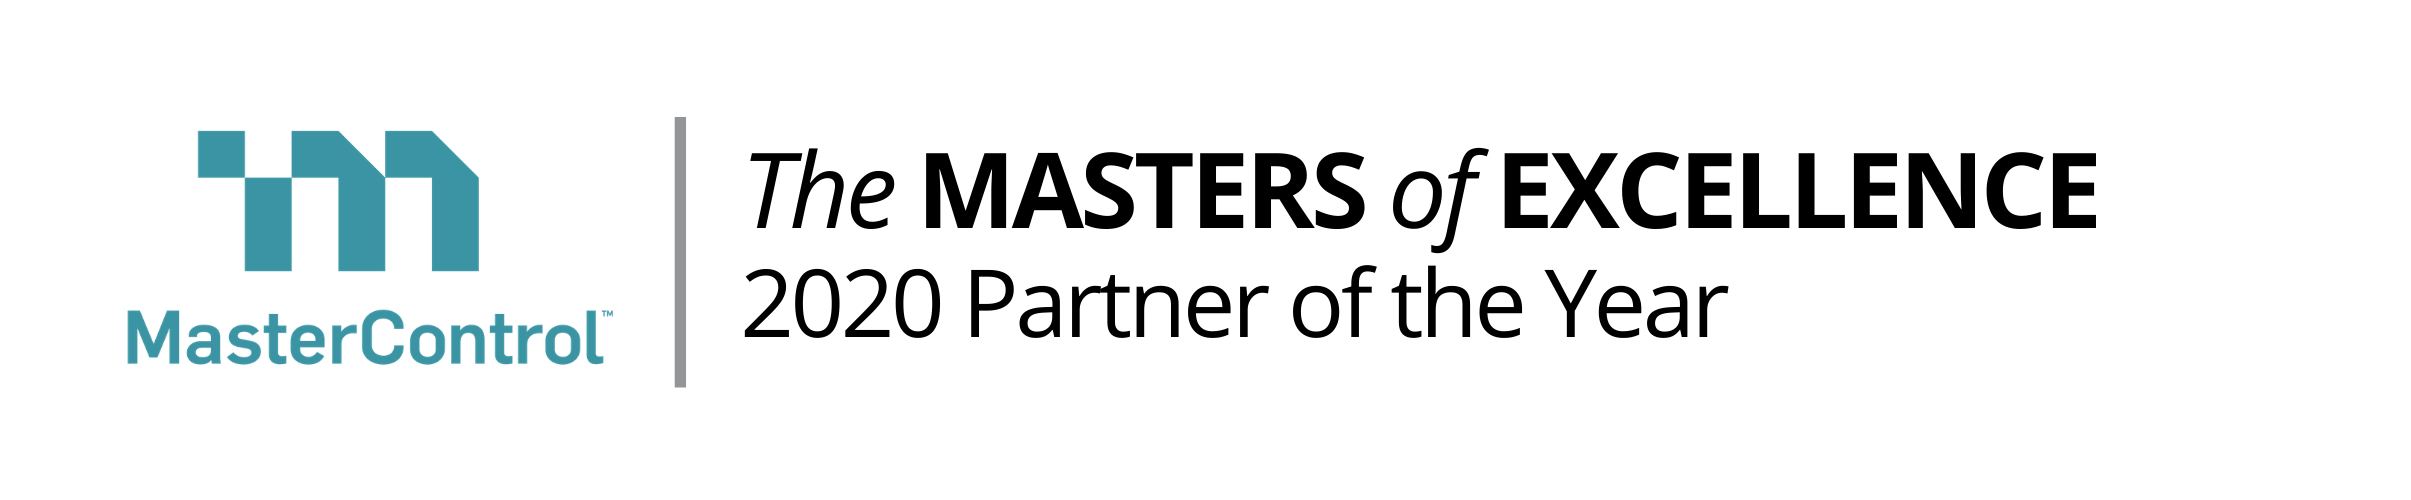 The MASTERS of EXCELLENCE 2020 Partner of the Year